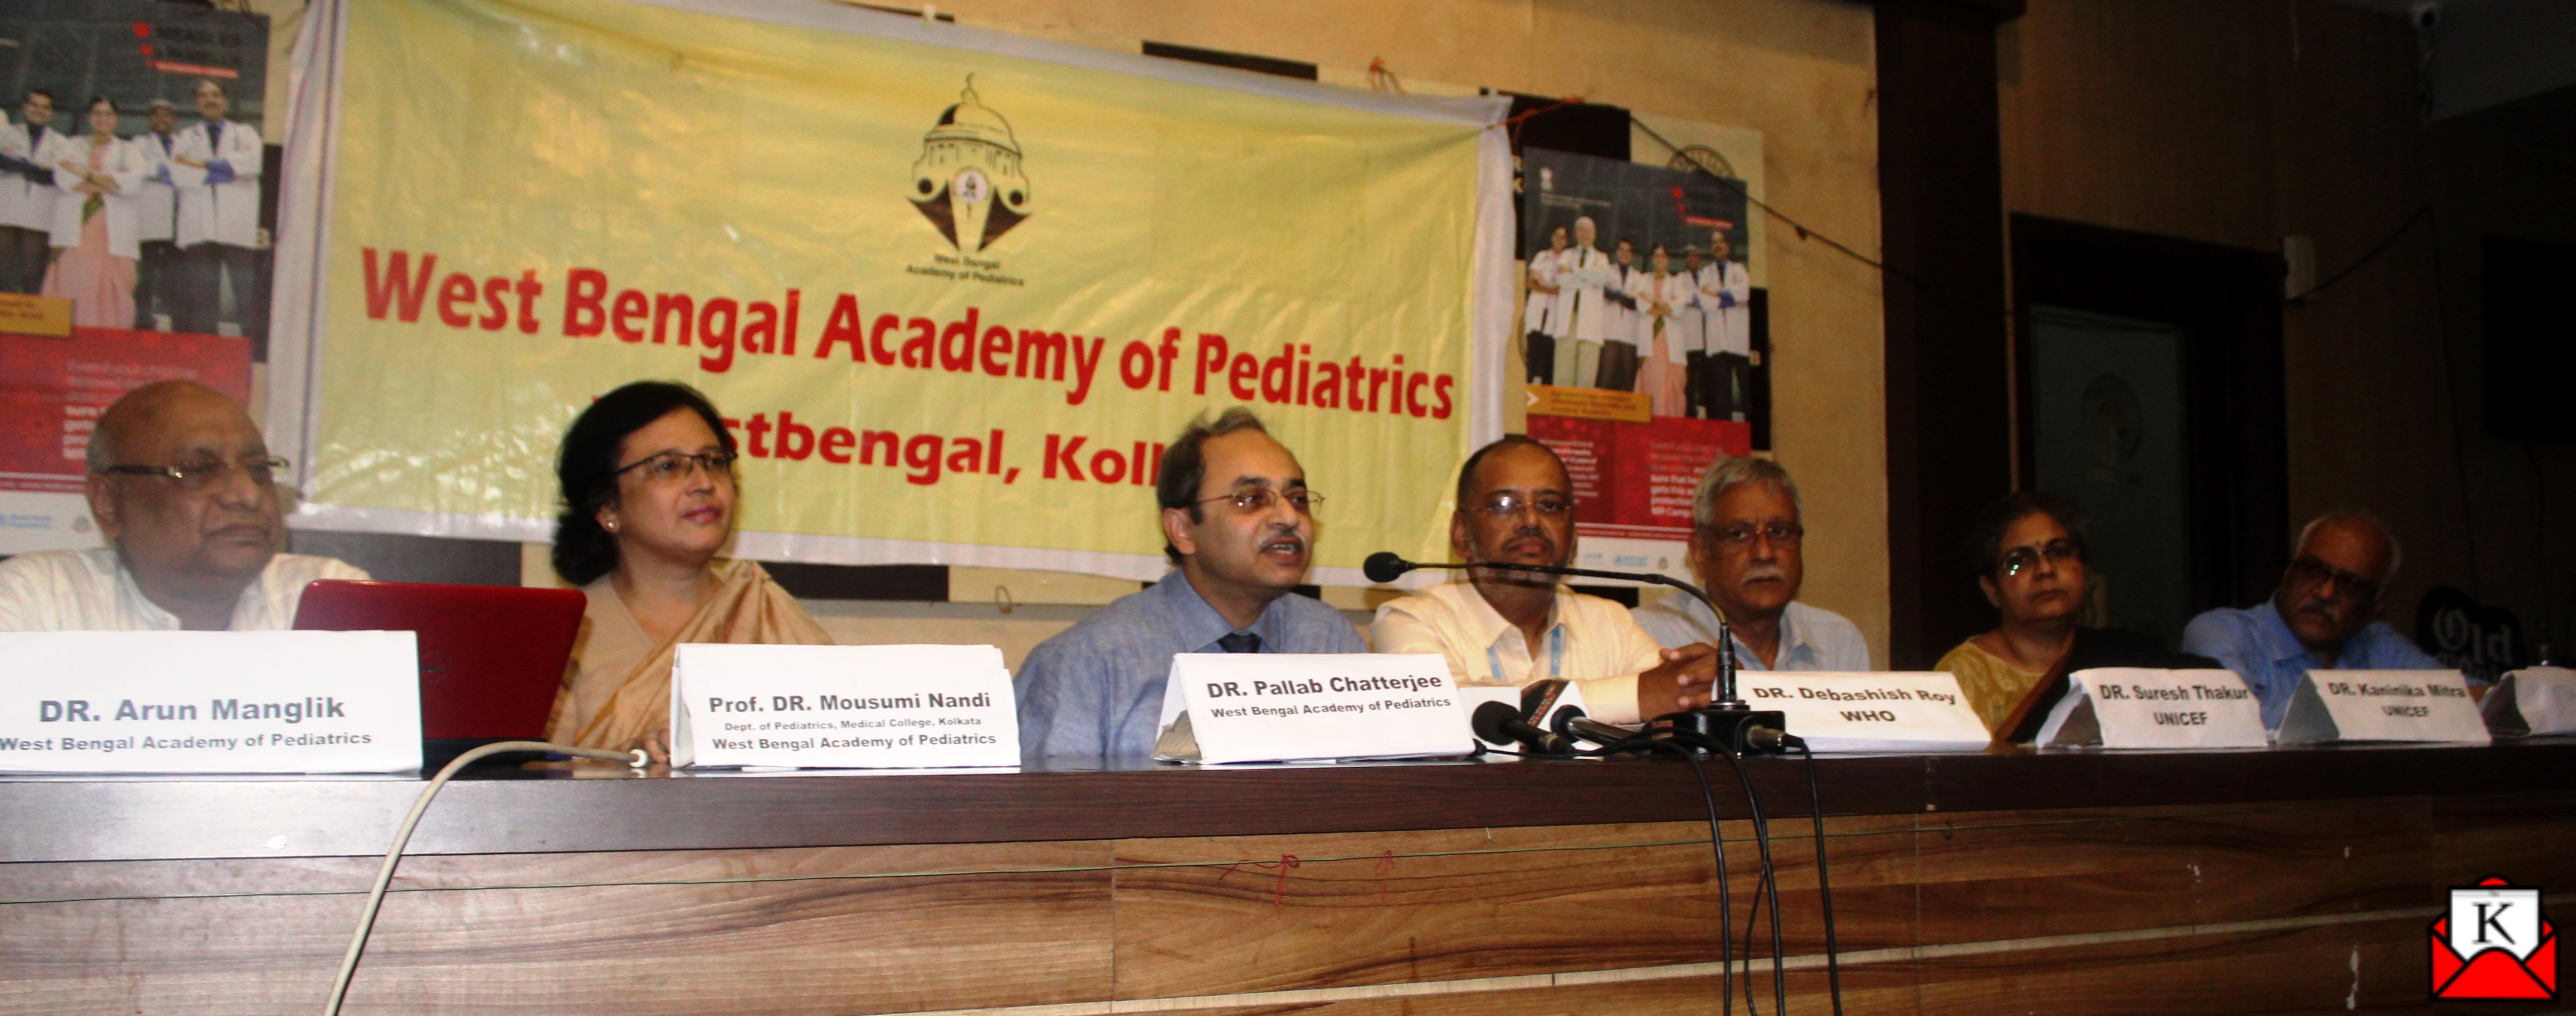 Measles Rubella Vaccination Campaign Announced to Eradicate Measles-Rubella From India